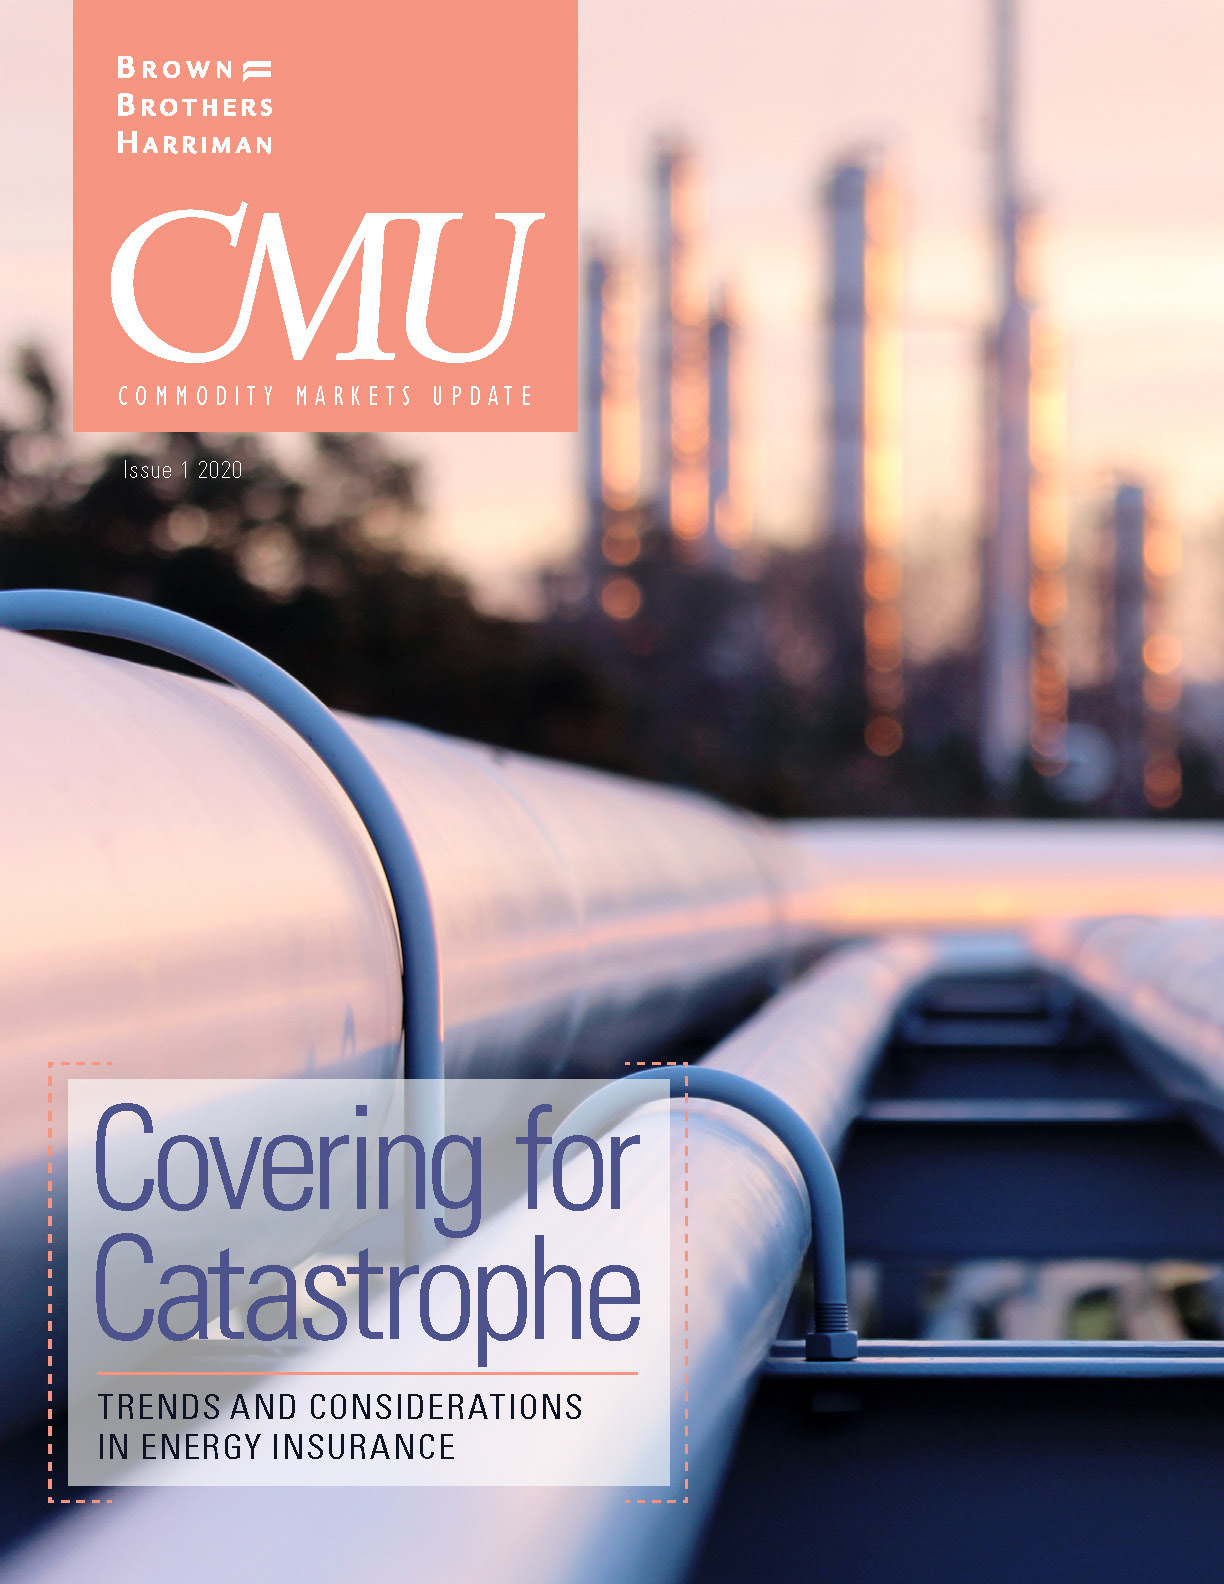 Covering for catastrophe: Trends and considerations in energy and insurance